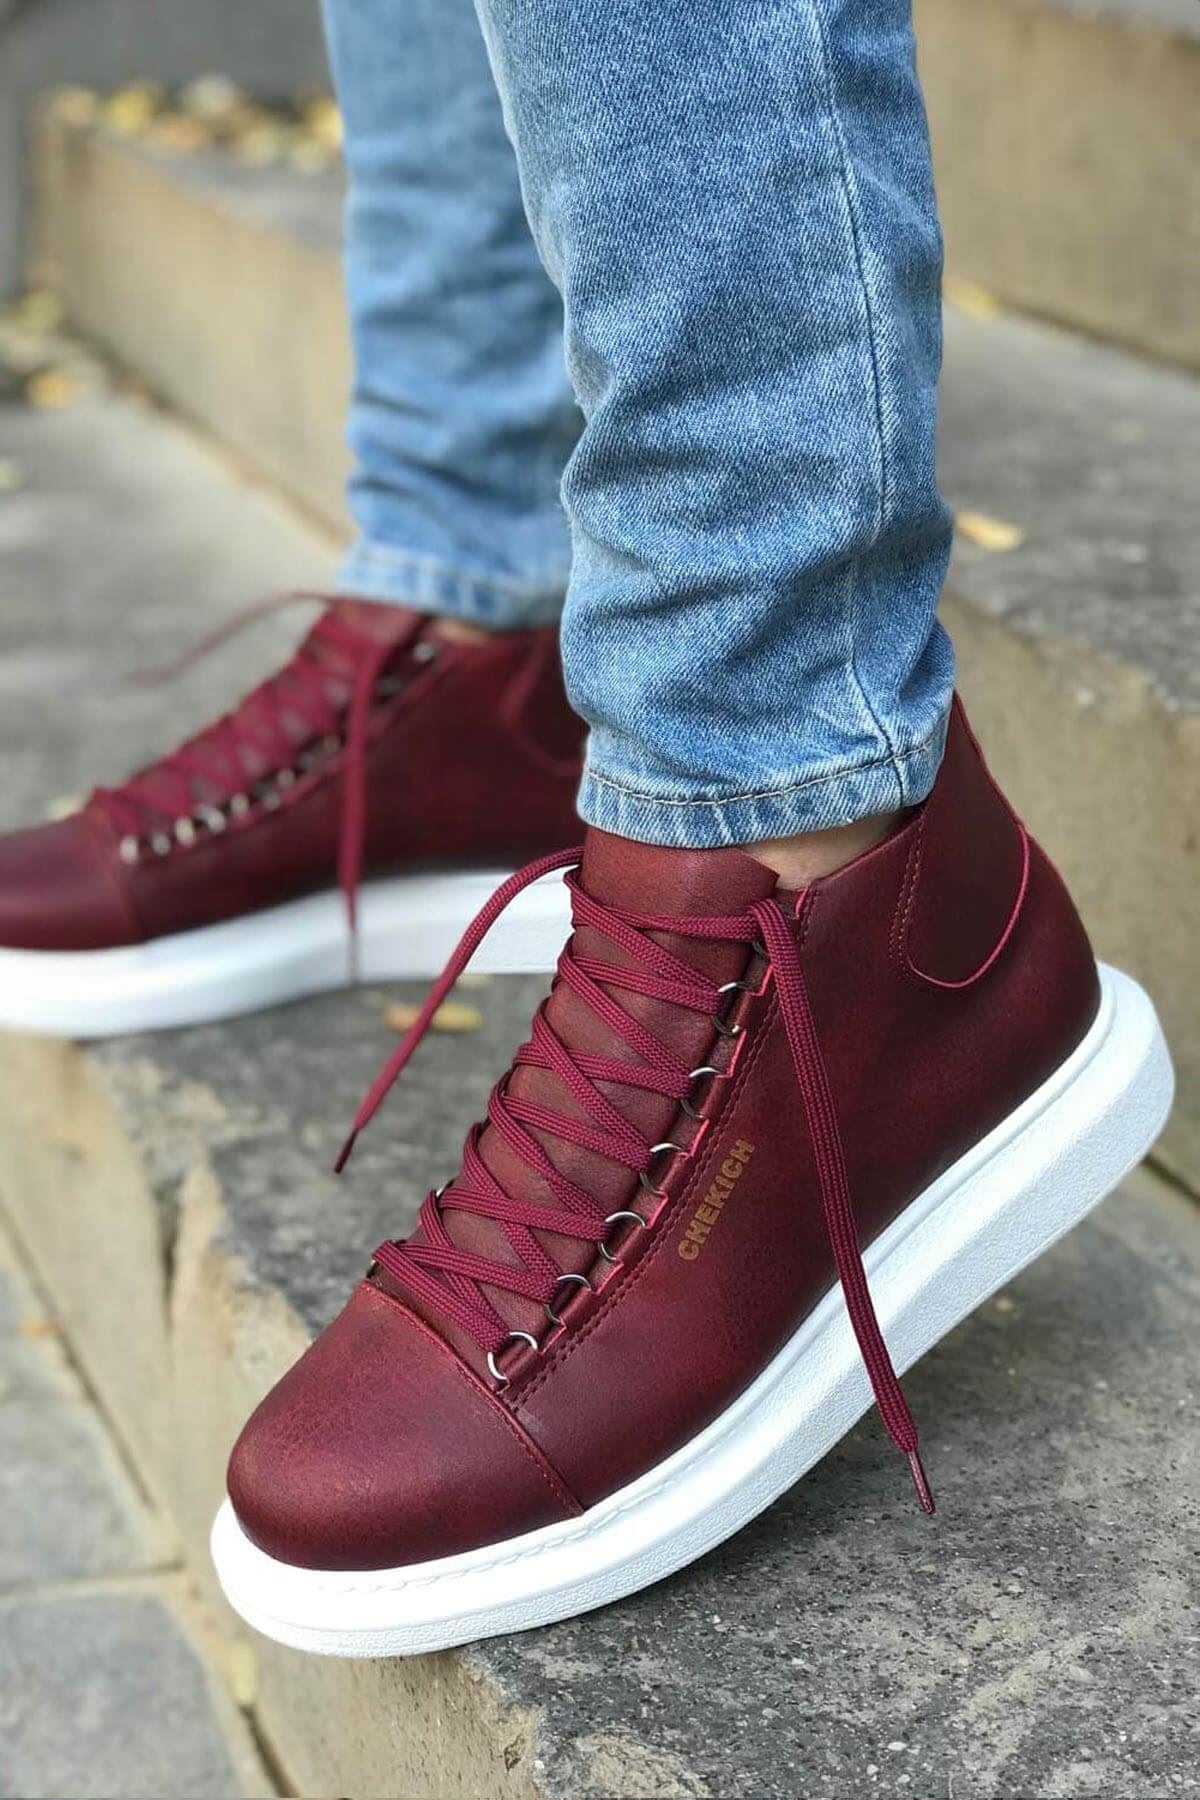 CH258 Men's Burgundy-White Sole Metal Slug Lace-up High Sole Casual Sneaker Sports Boots - STREETMODE™